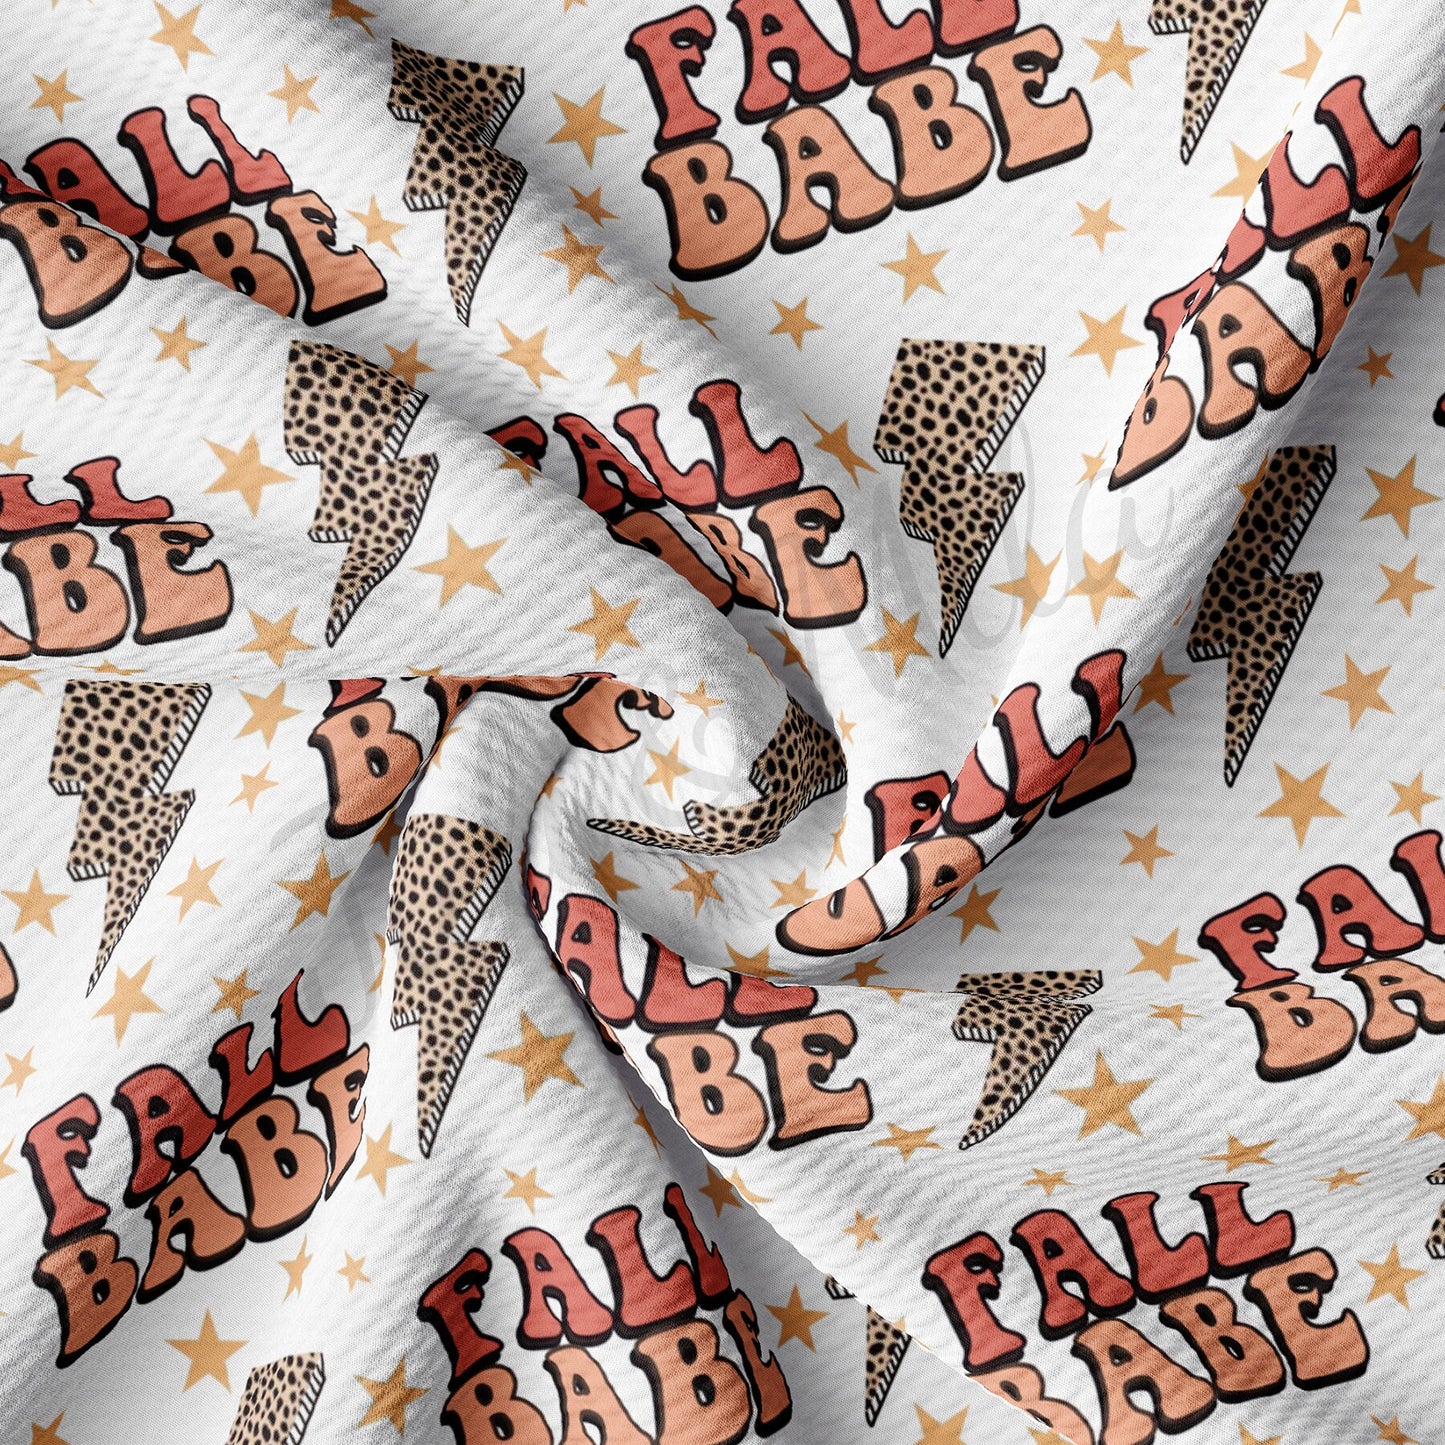 Fall Babe Bullet Textured Fabric  AA1434